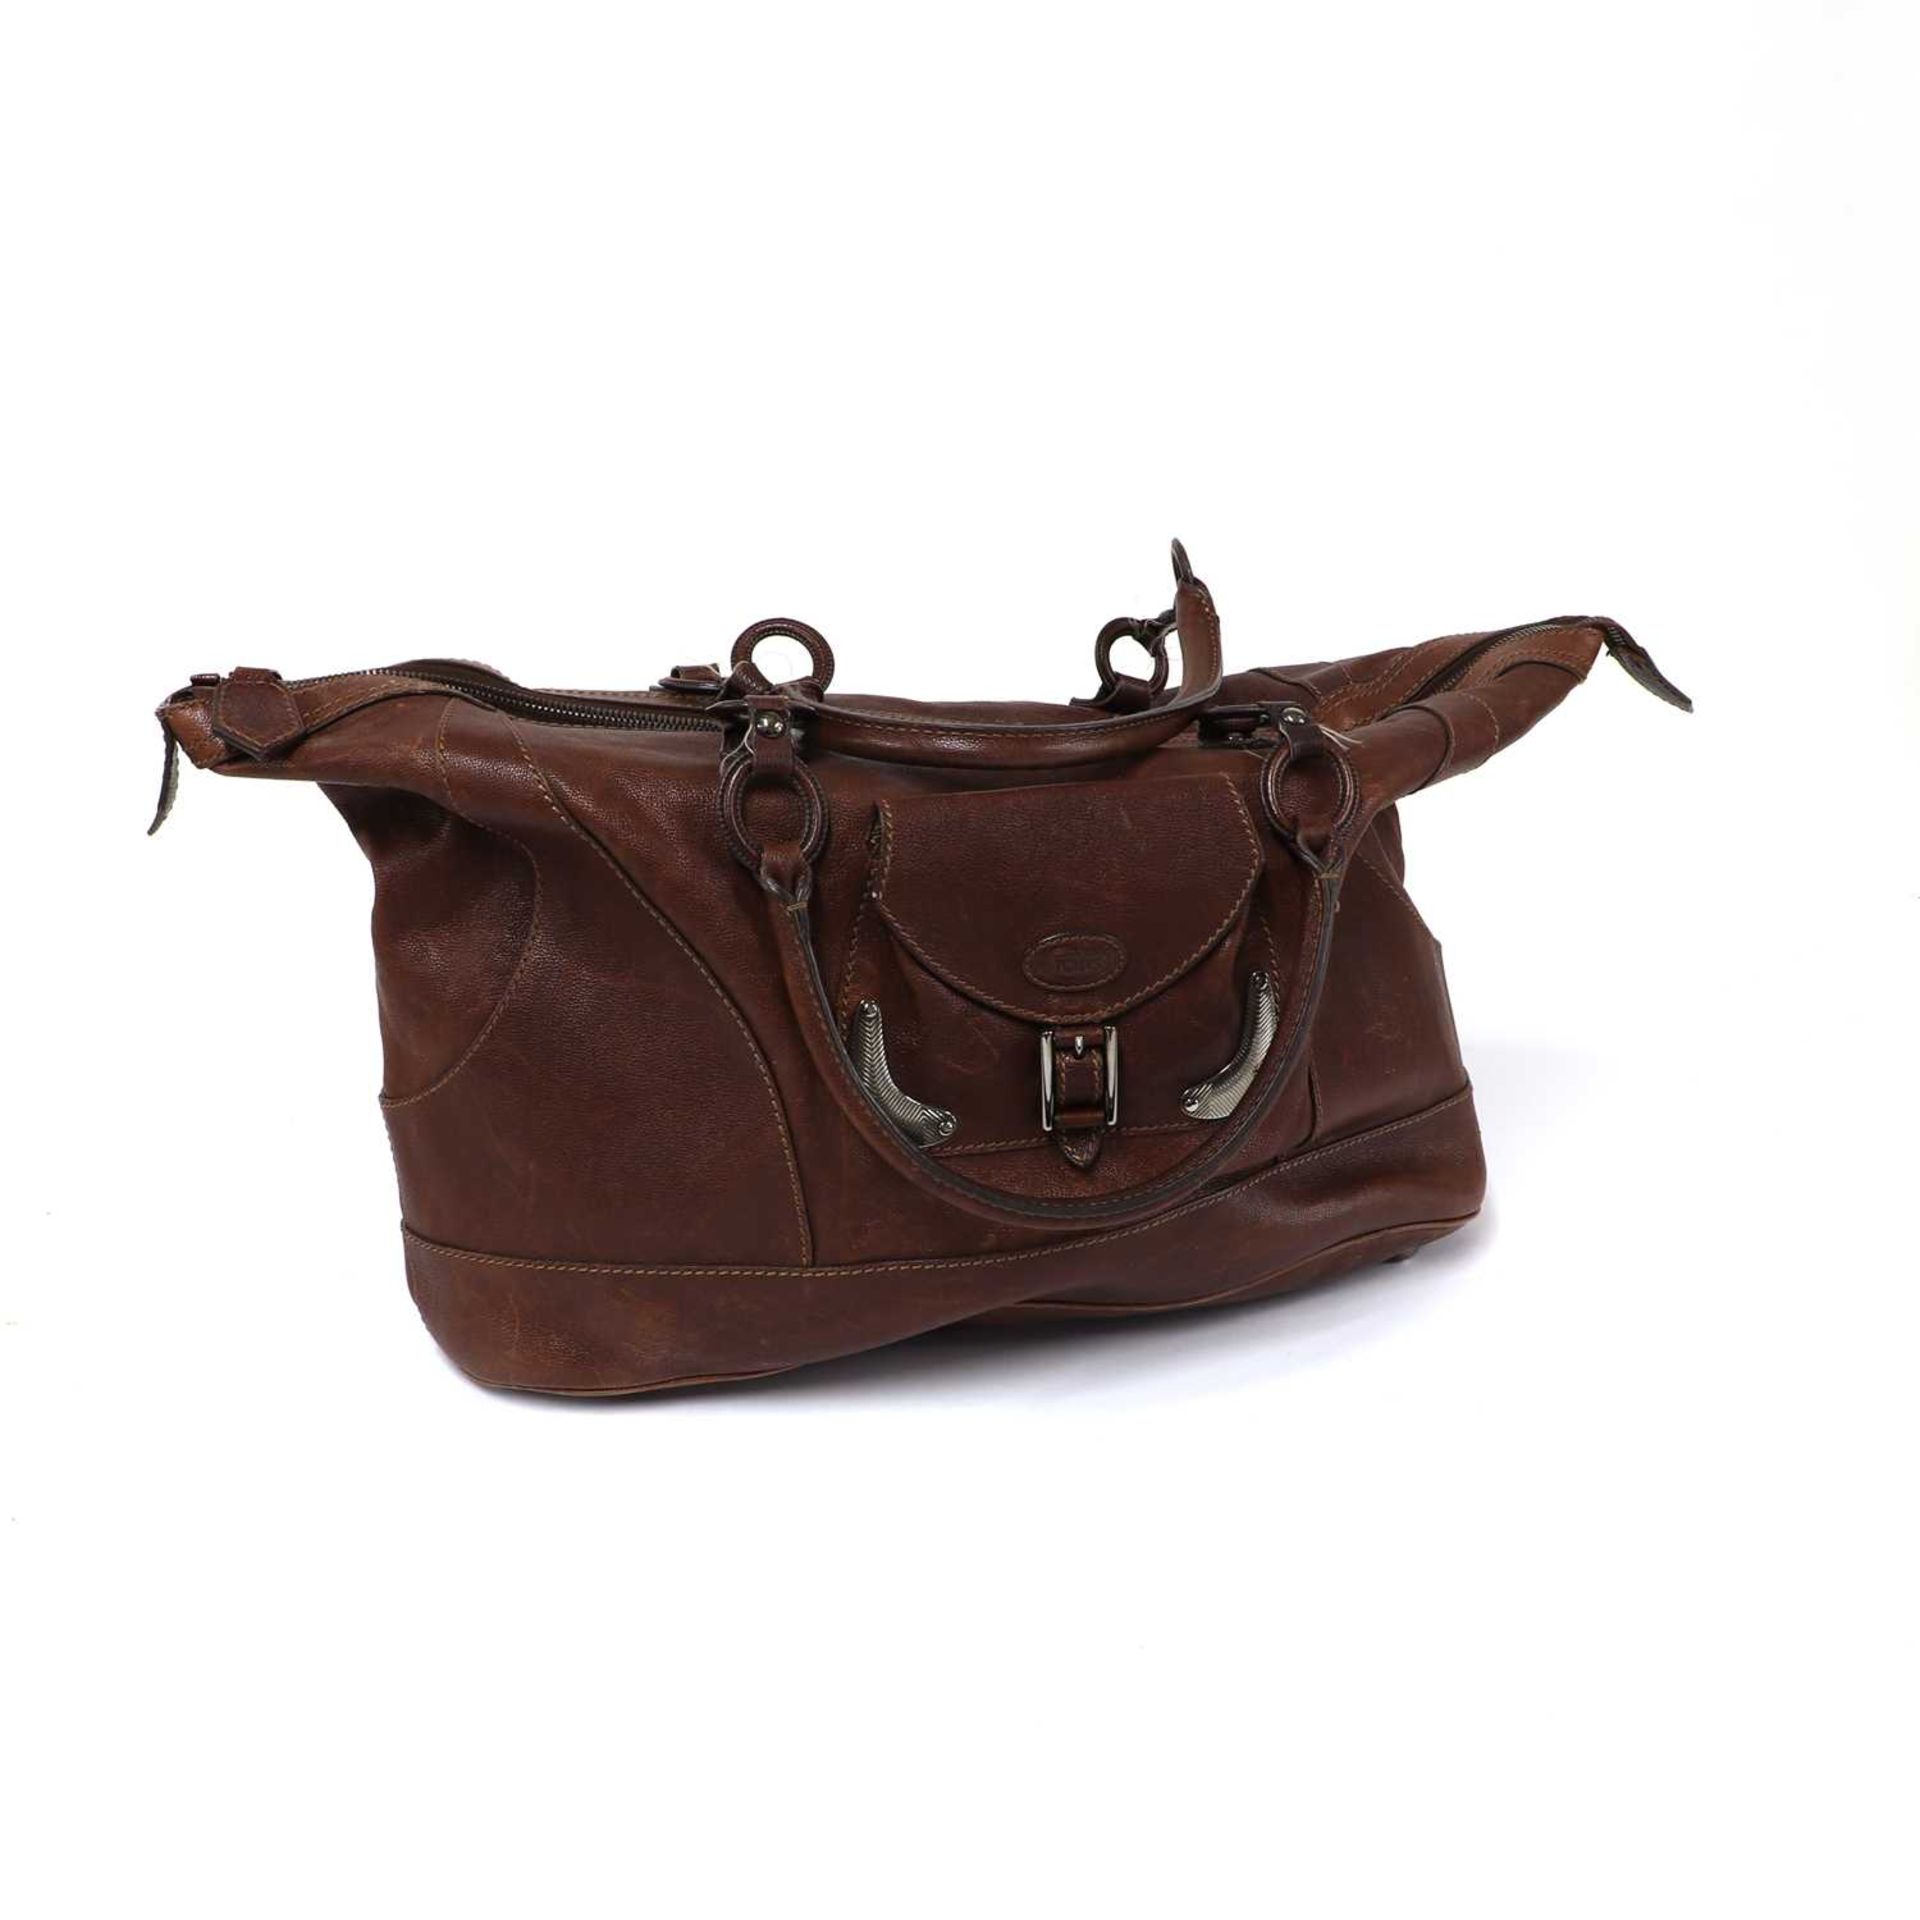 A Tods brown leather shopper tote,